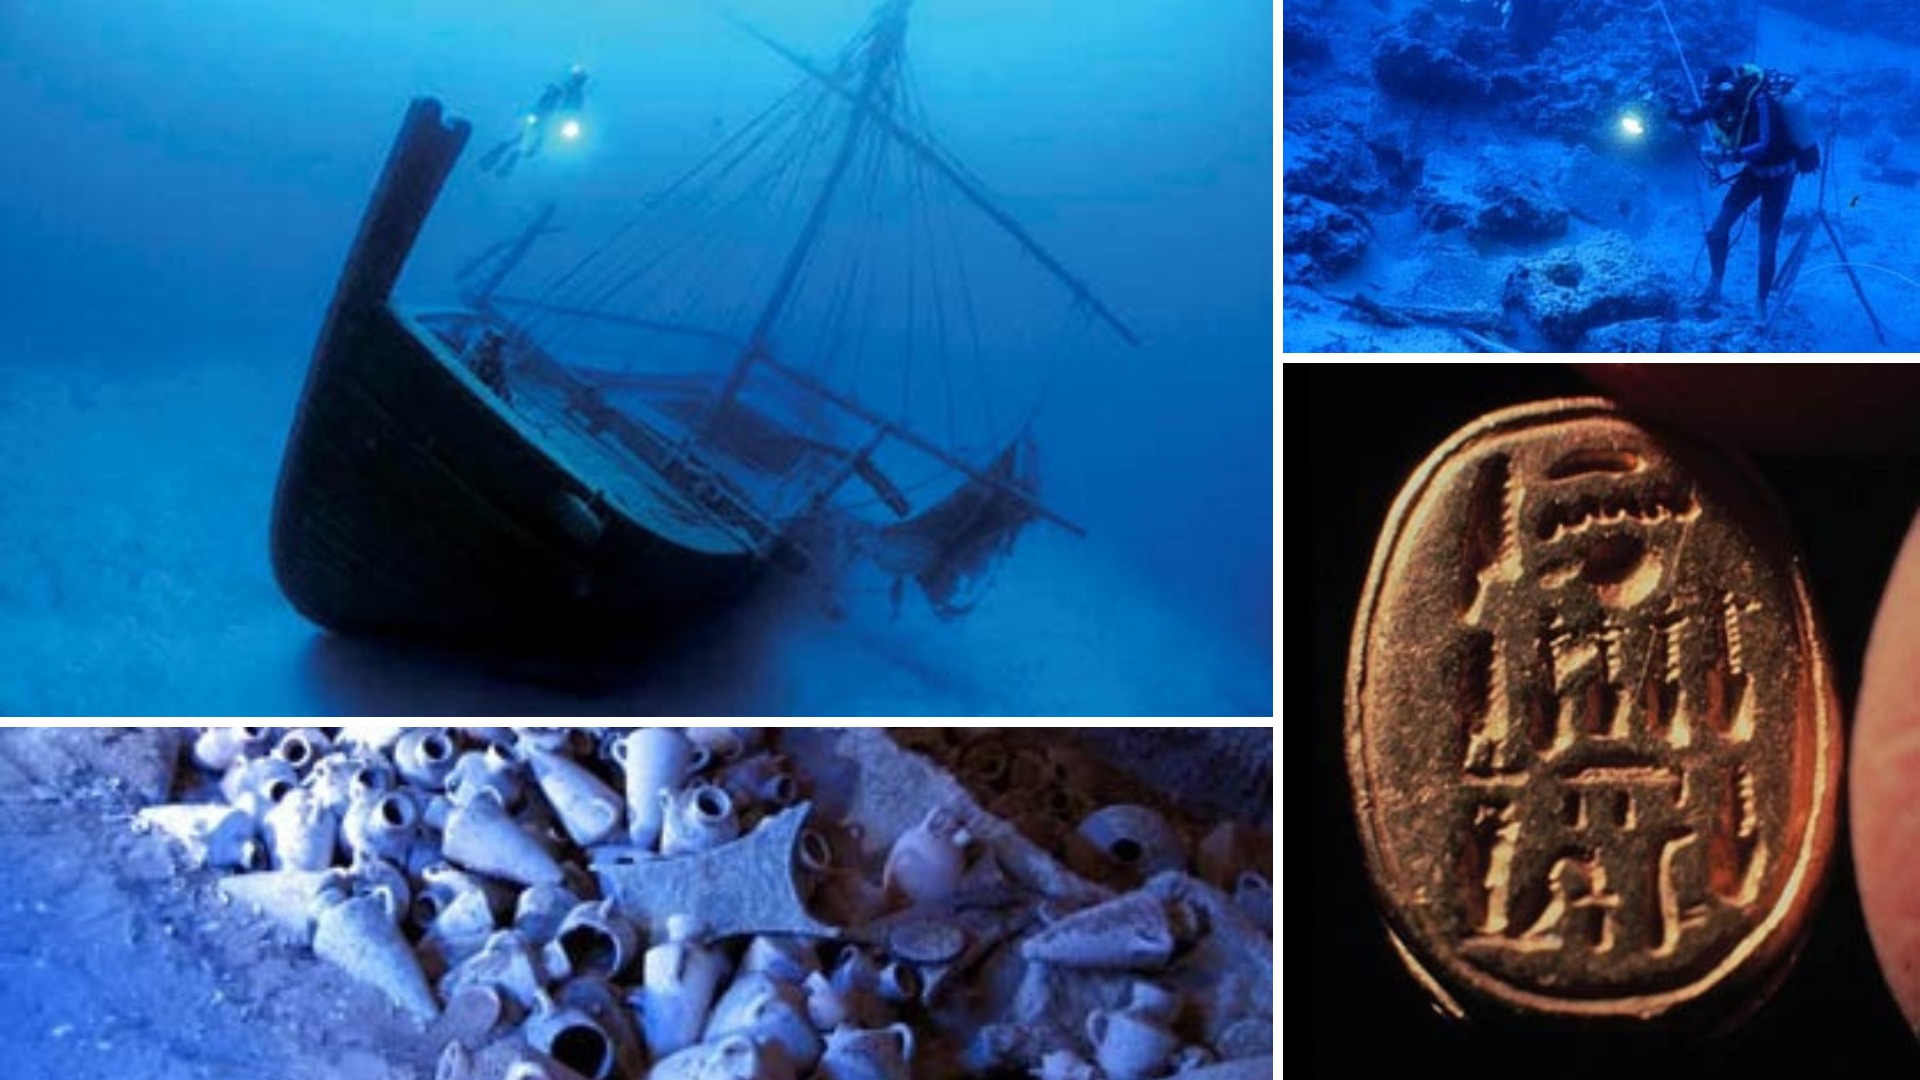 Uluburun, one of the oldest and wealthiest shipwrecks ever discovered